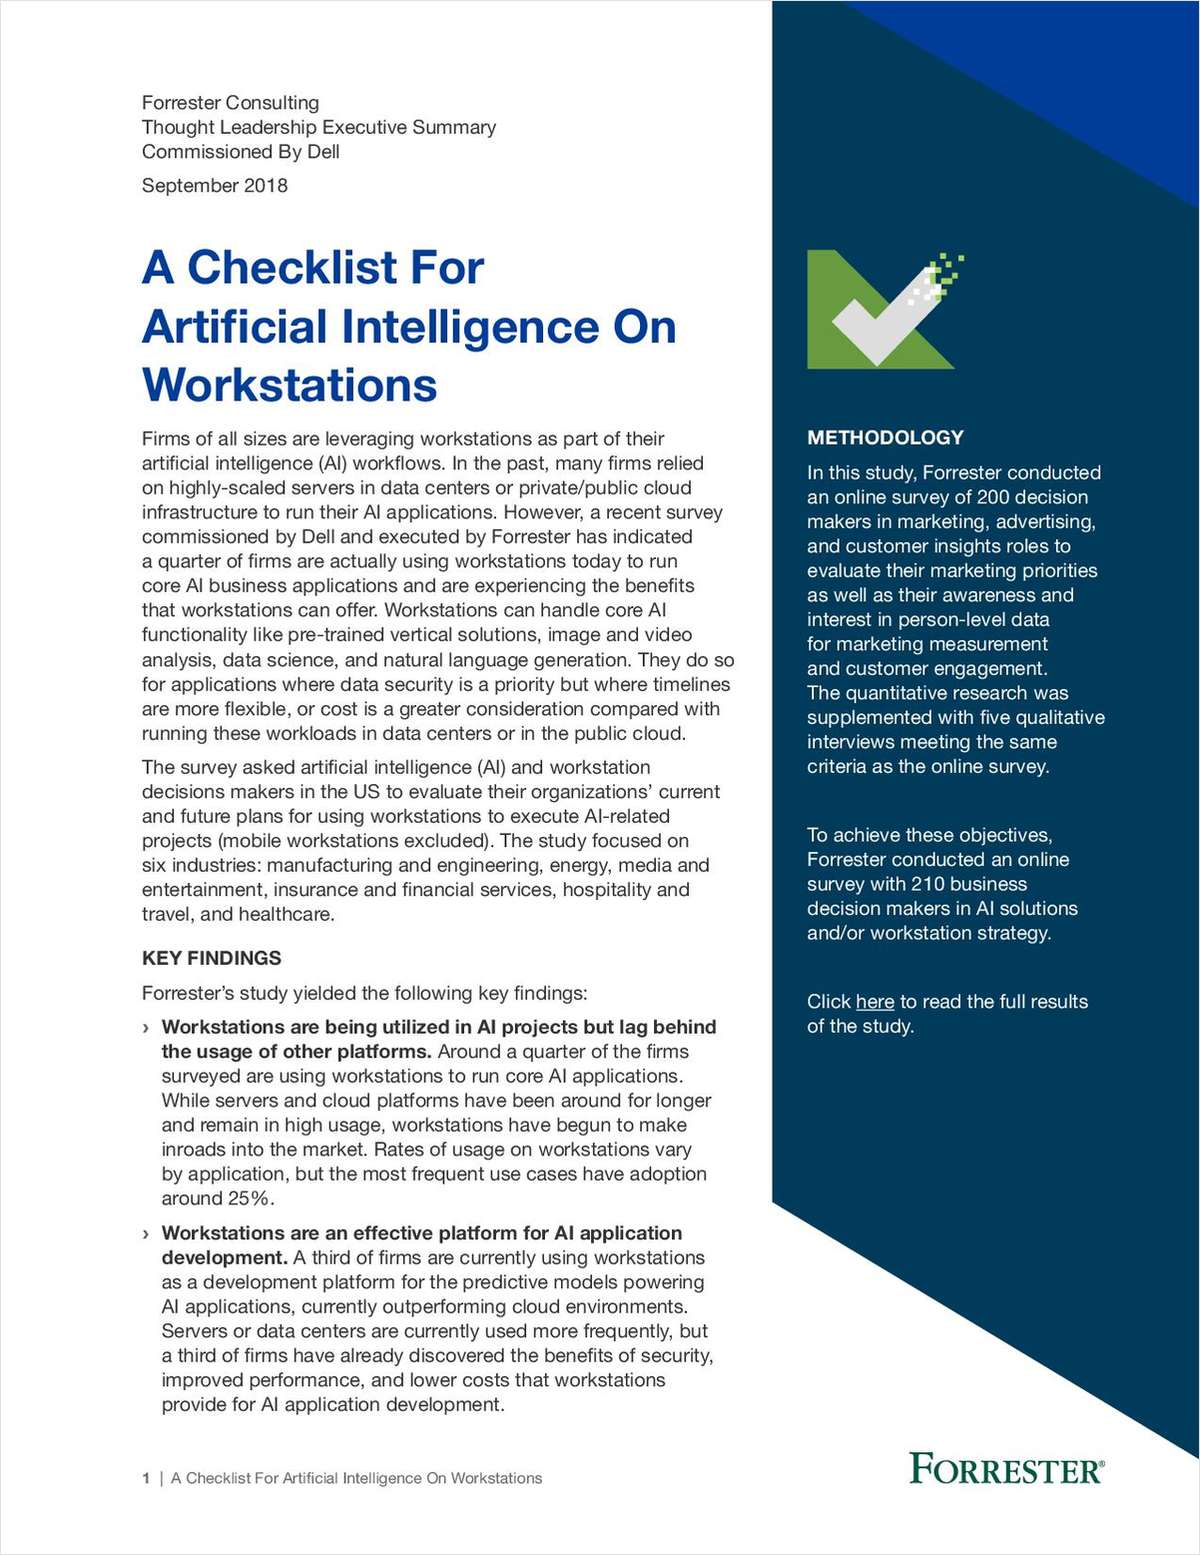 A Checklist For Artificial Intelligence On Workstations